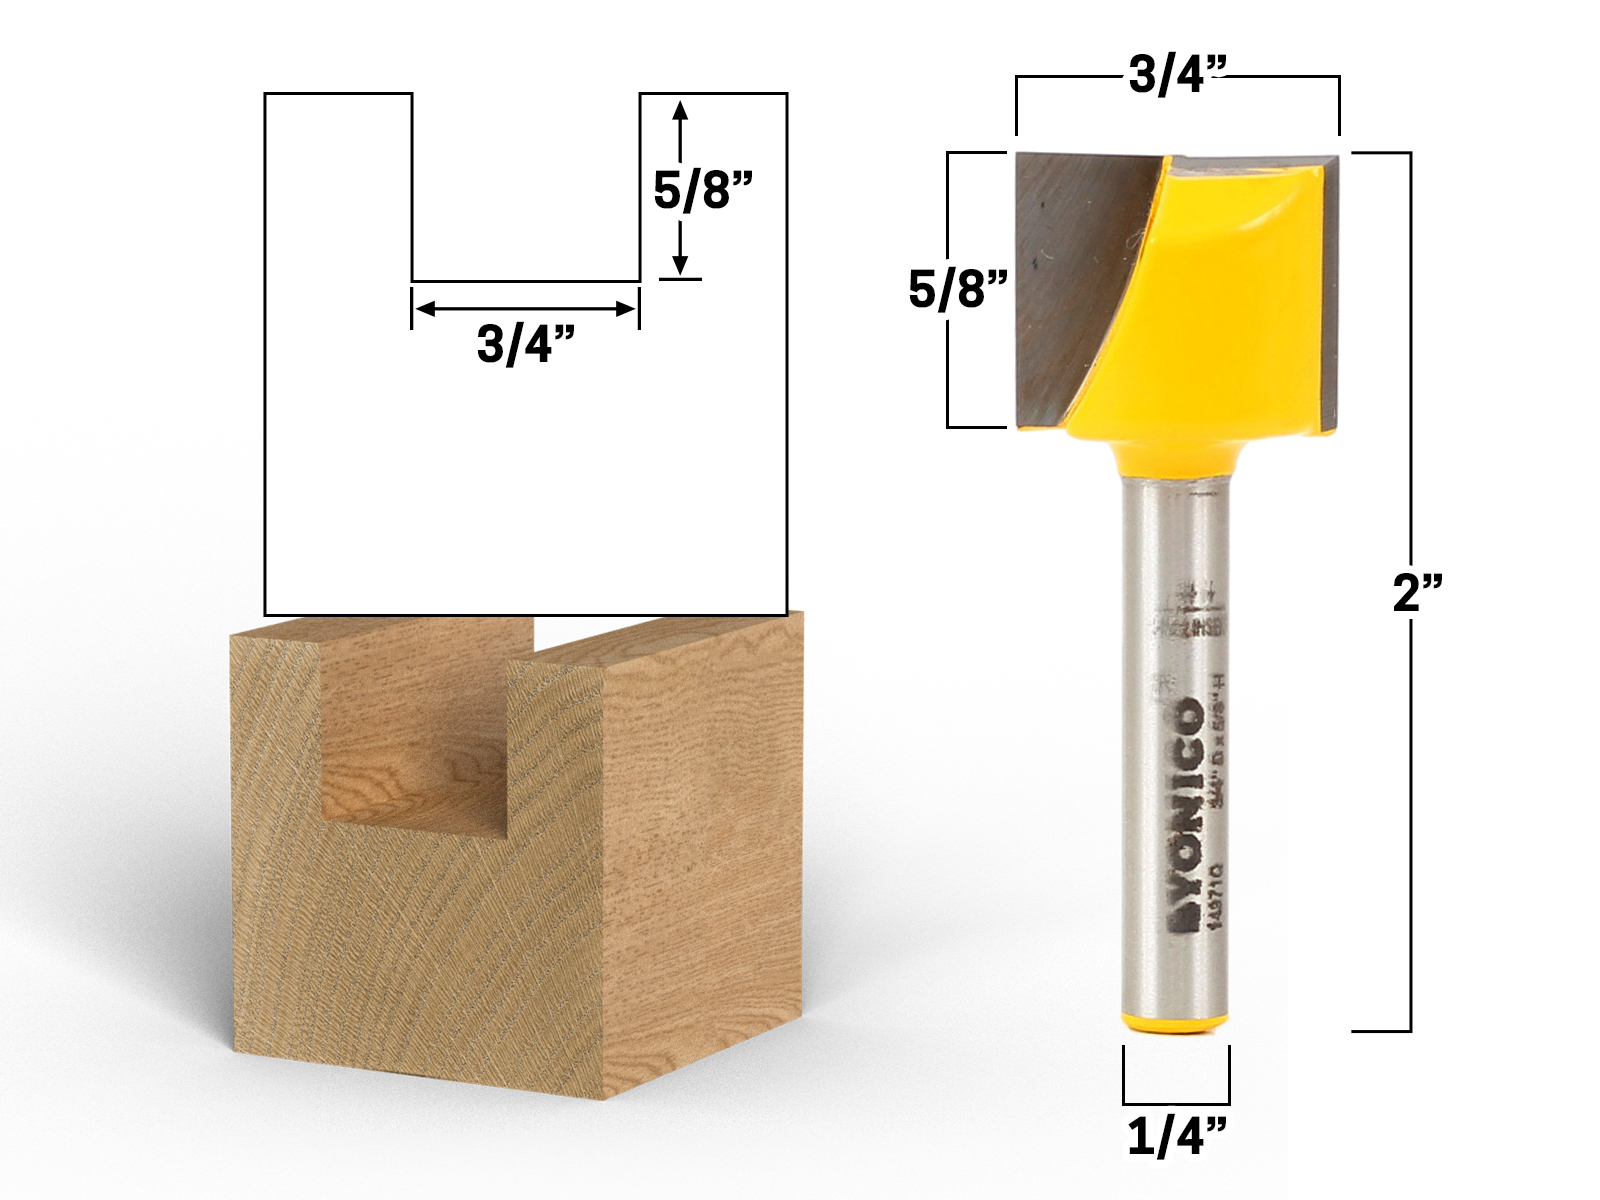 Yonico 14873 1/2" Shank 2-1/2" Diameter Bottom Cleaning Router Bit 